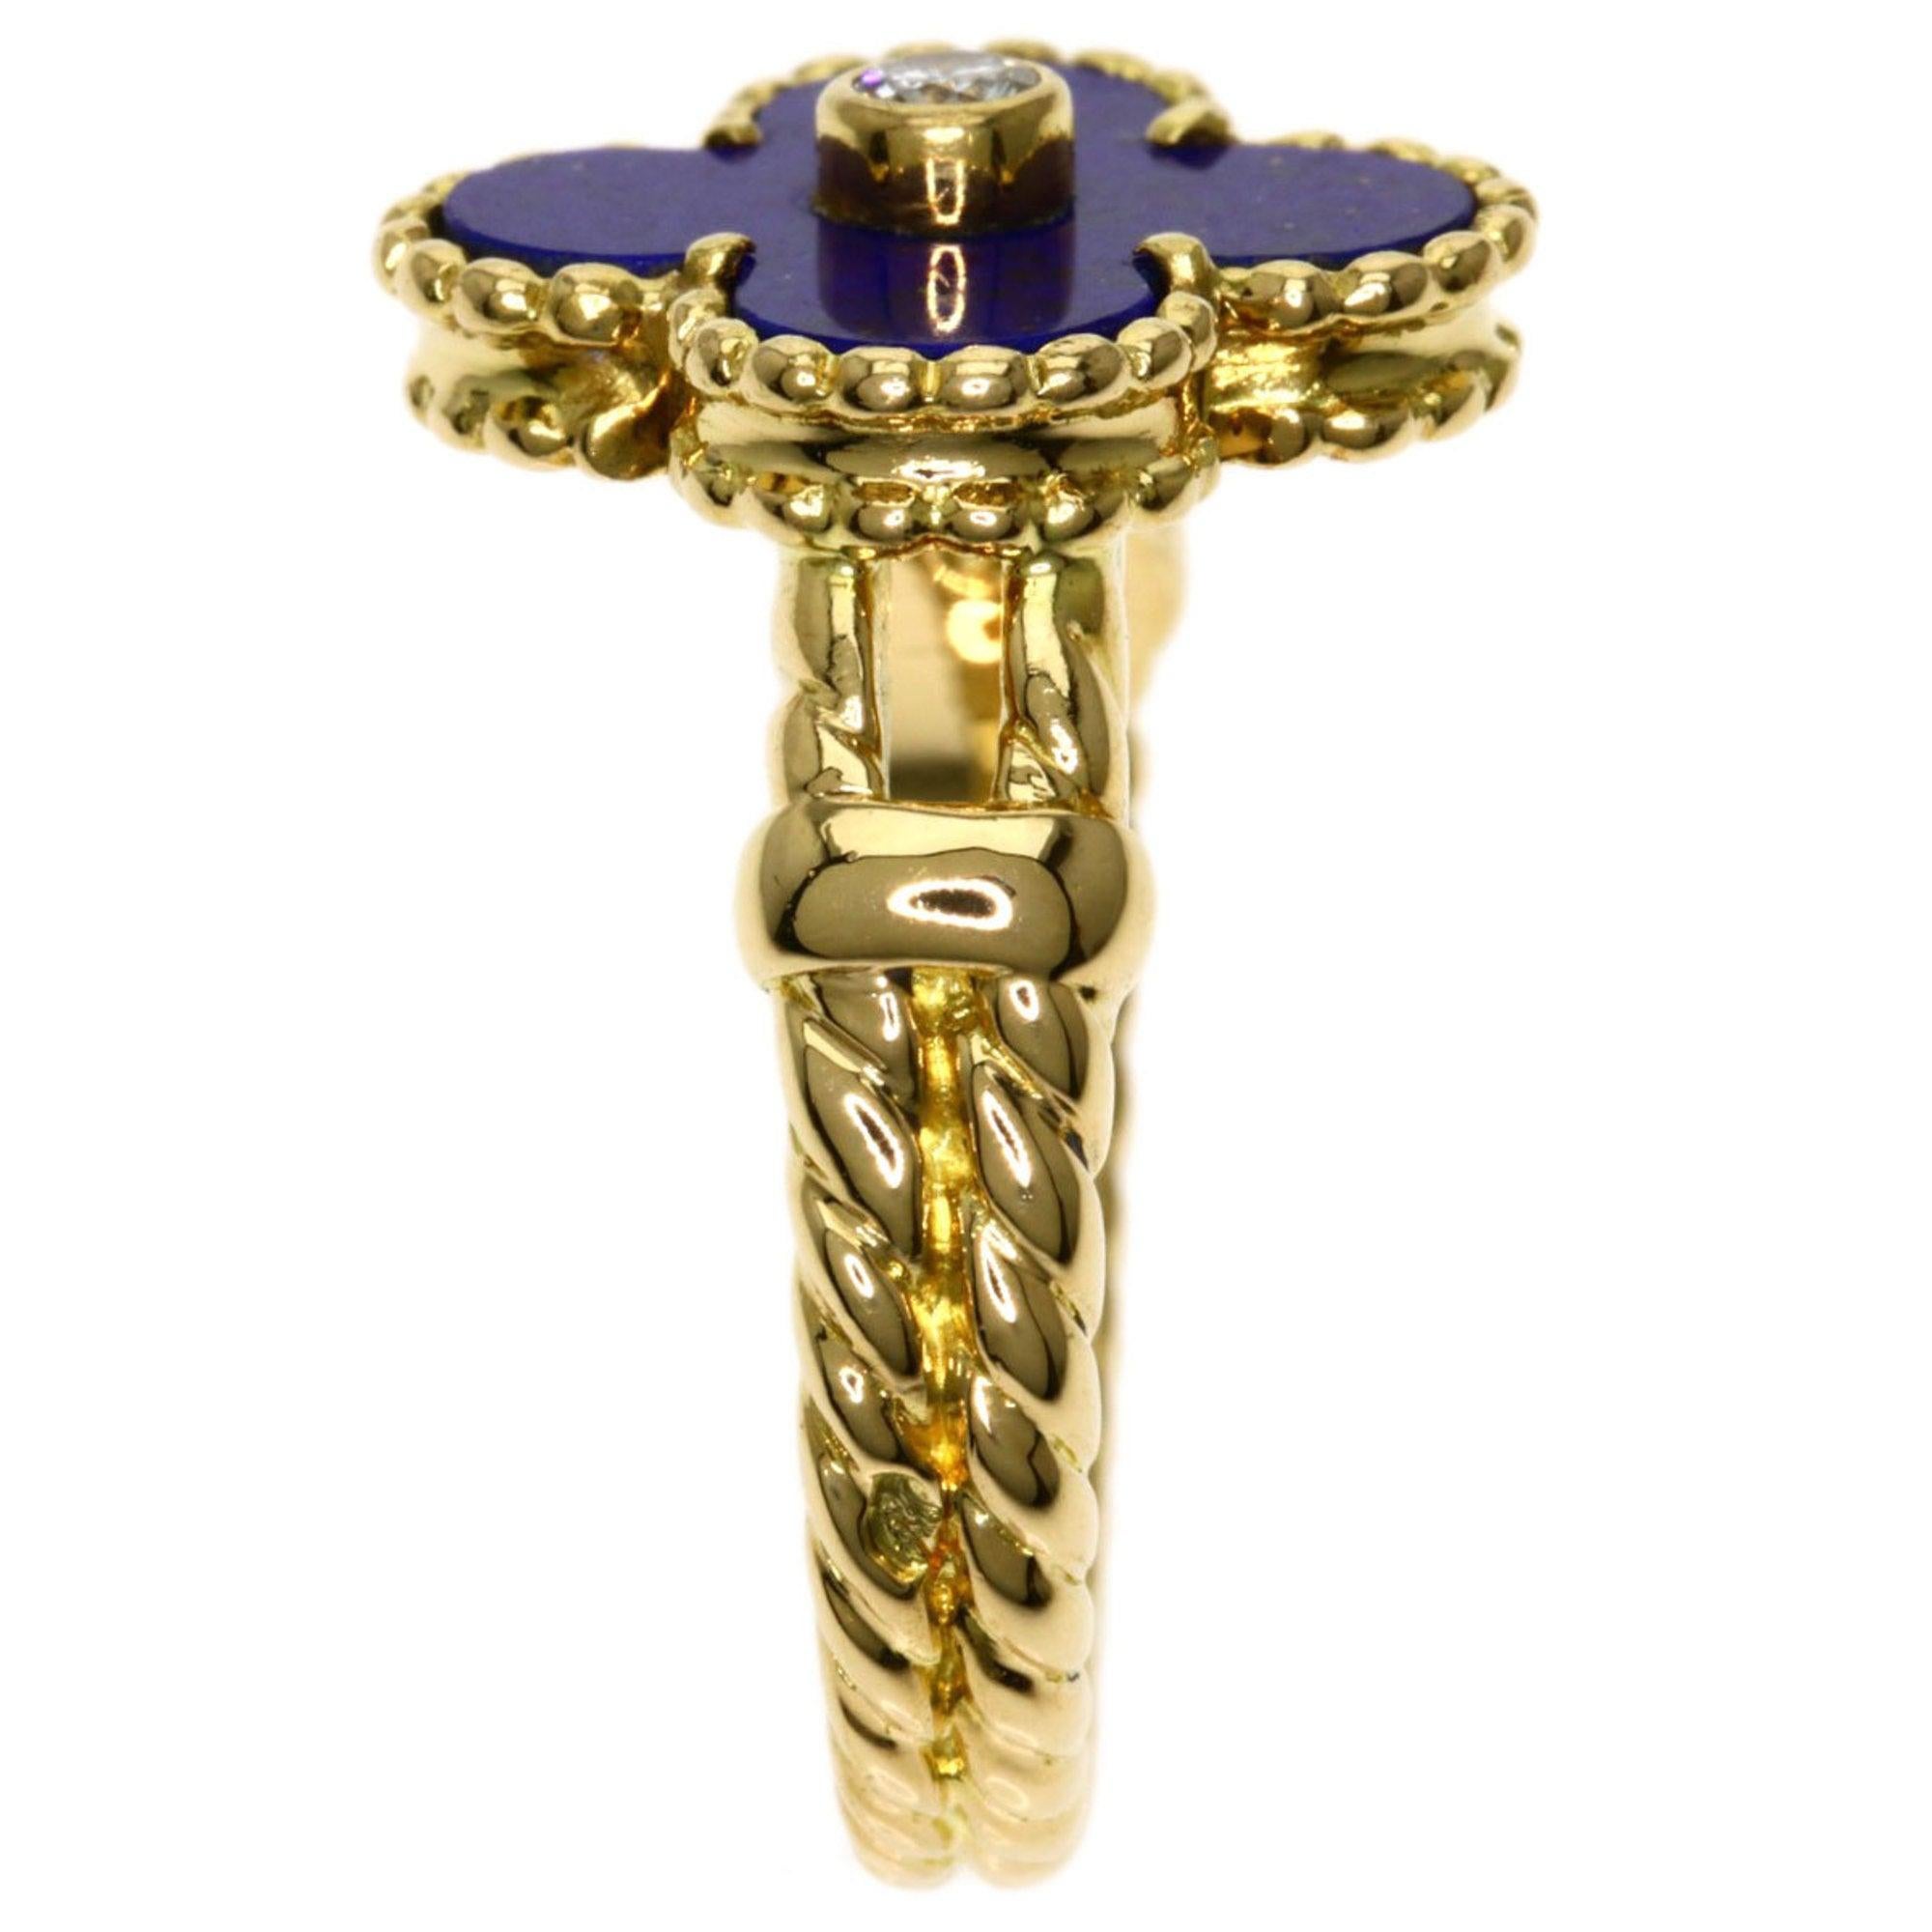 Van Cleef & Arpels Lapis Lazuli Diamond Ring in 18K Yellow Gold In Good Condition For Sale In London, GB